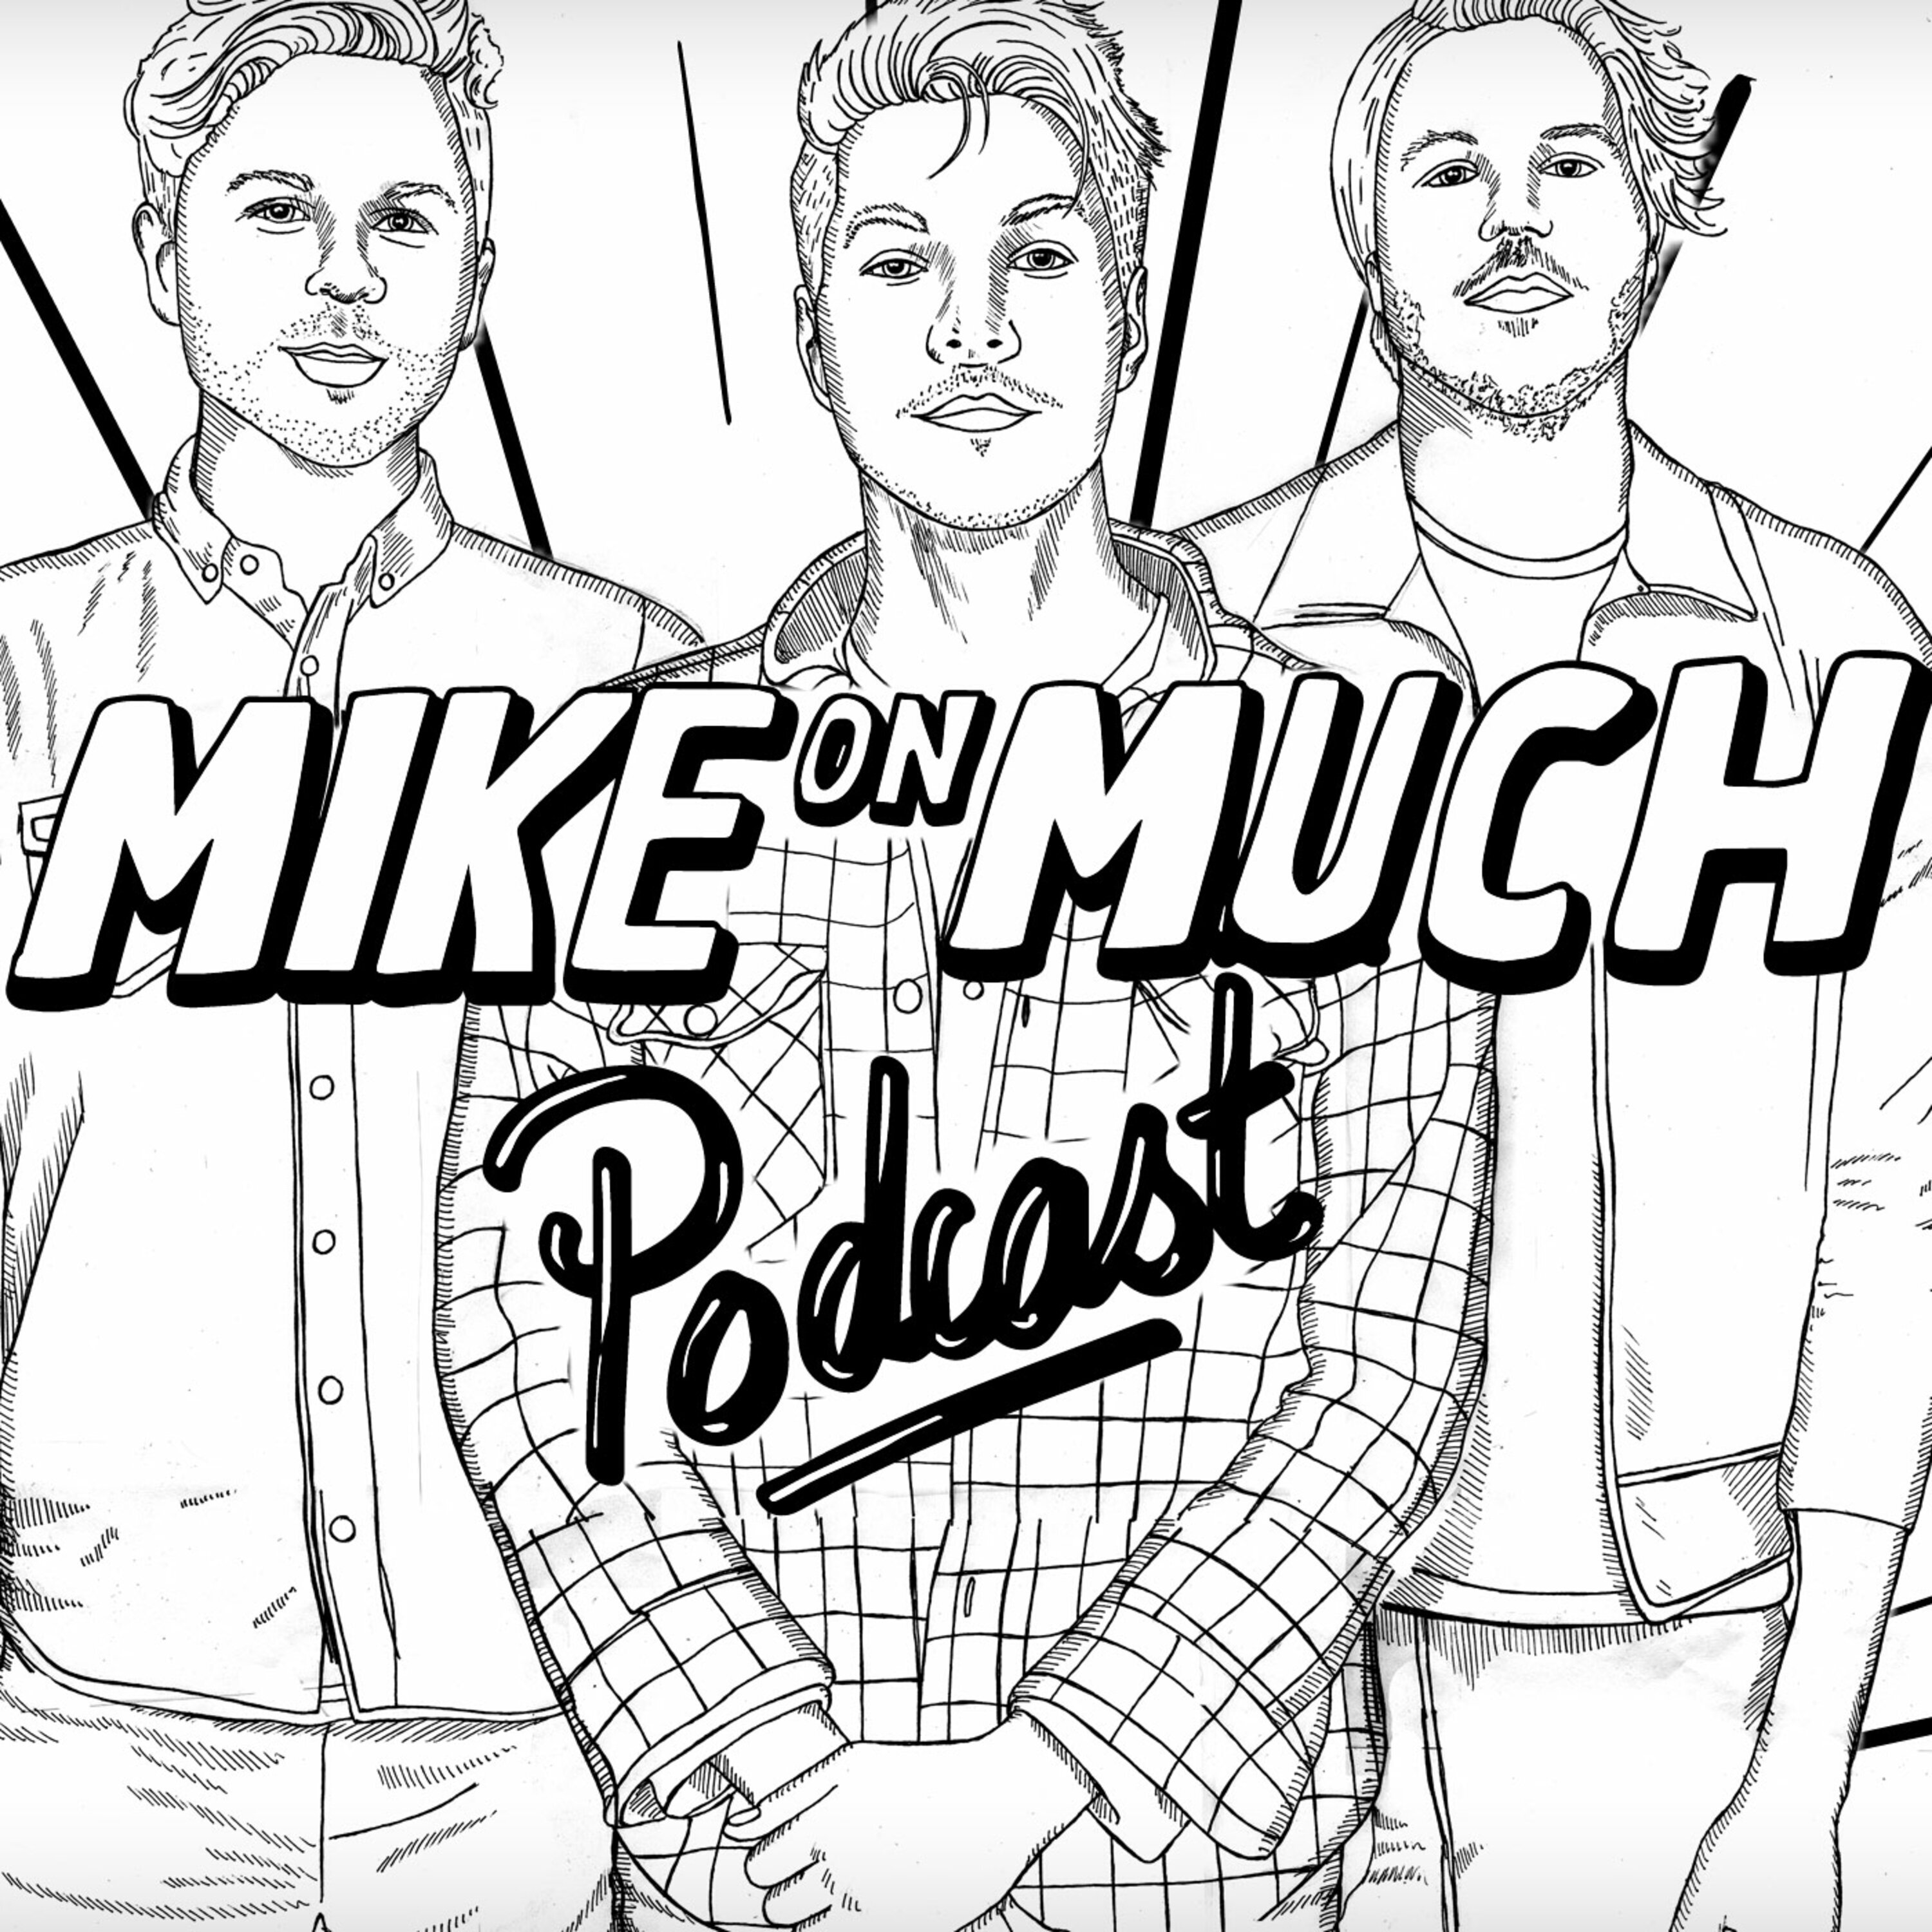 Season 1 Mike On Much: ”The Most Frugal People Are The Cheapest”